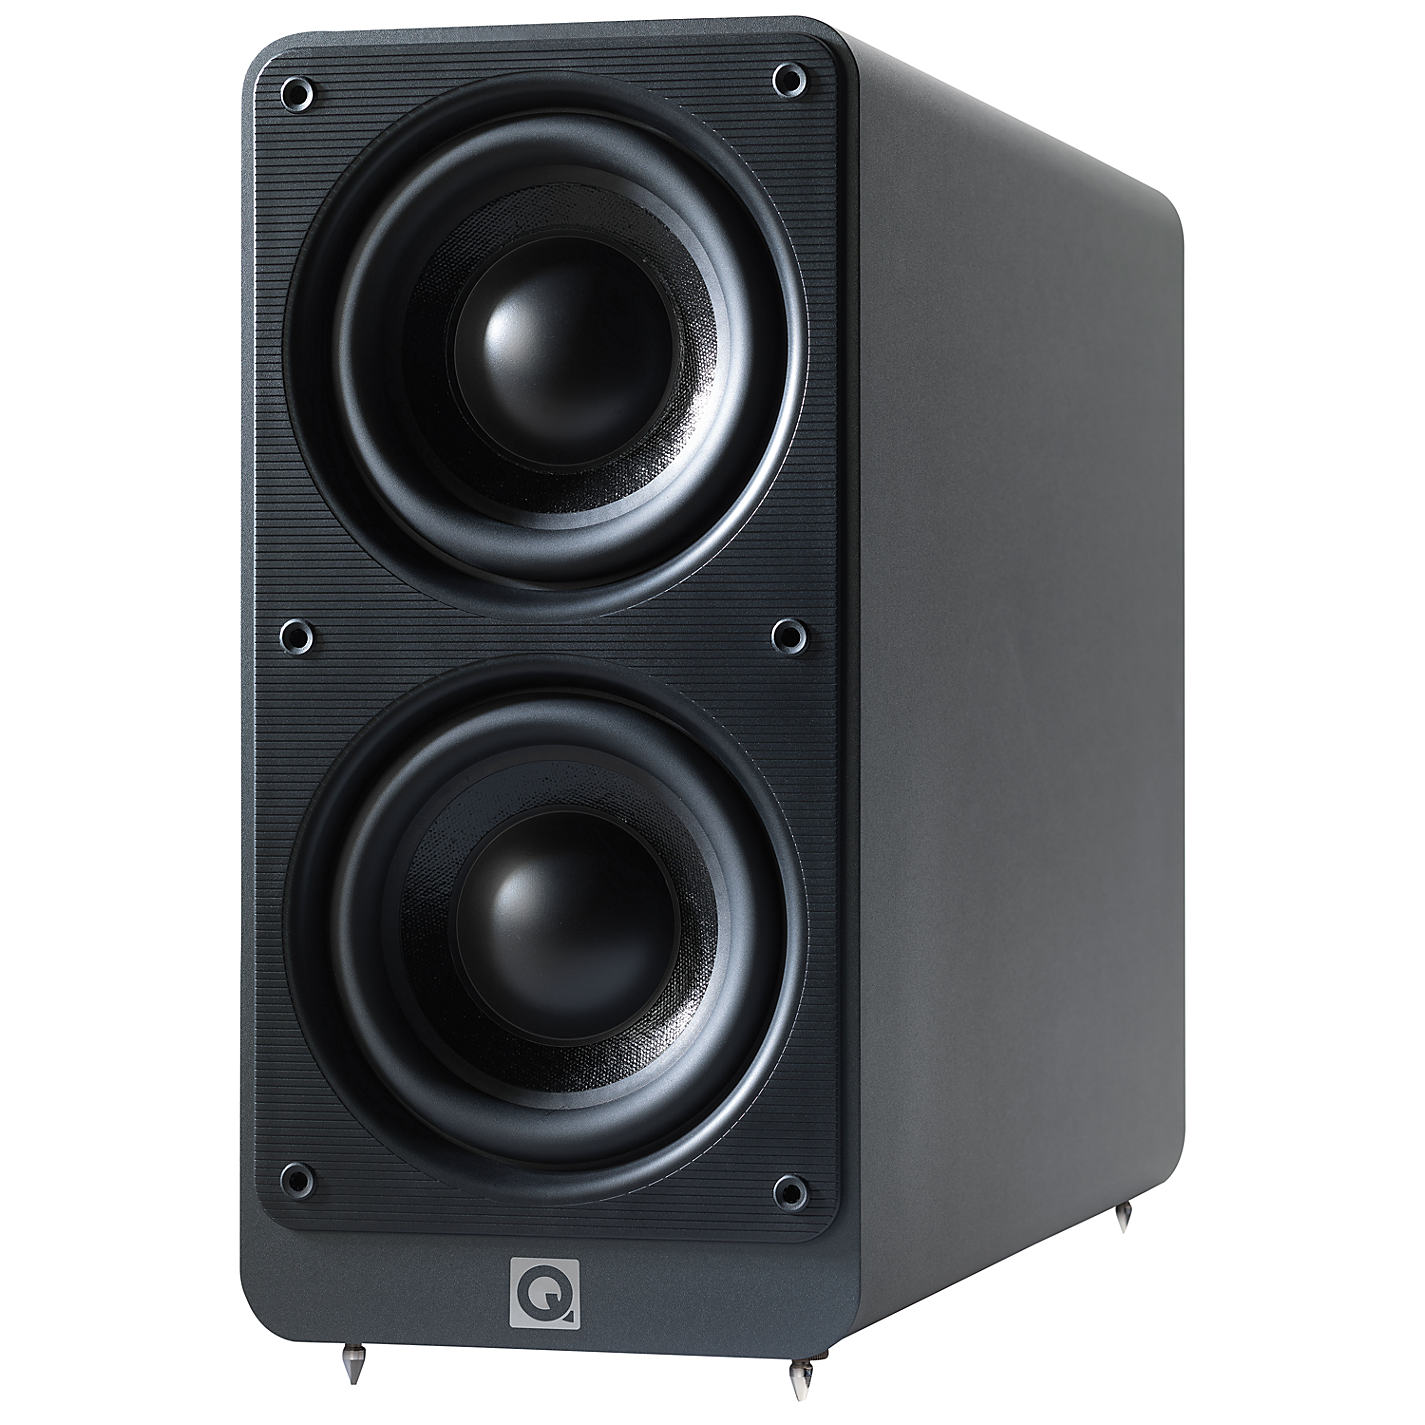 Q Acoustic 2070 powered sub woofer SOLD 231503065?$prod_exlrg$